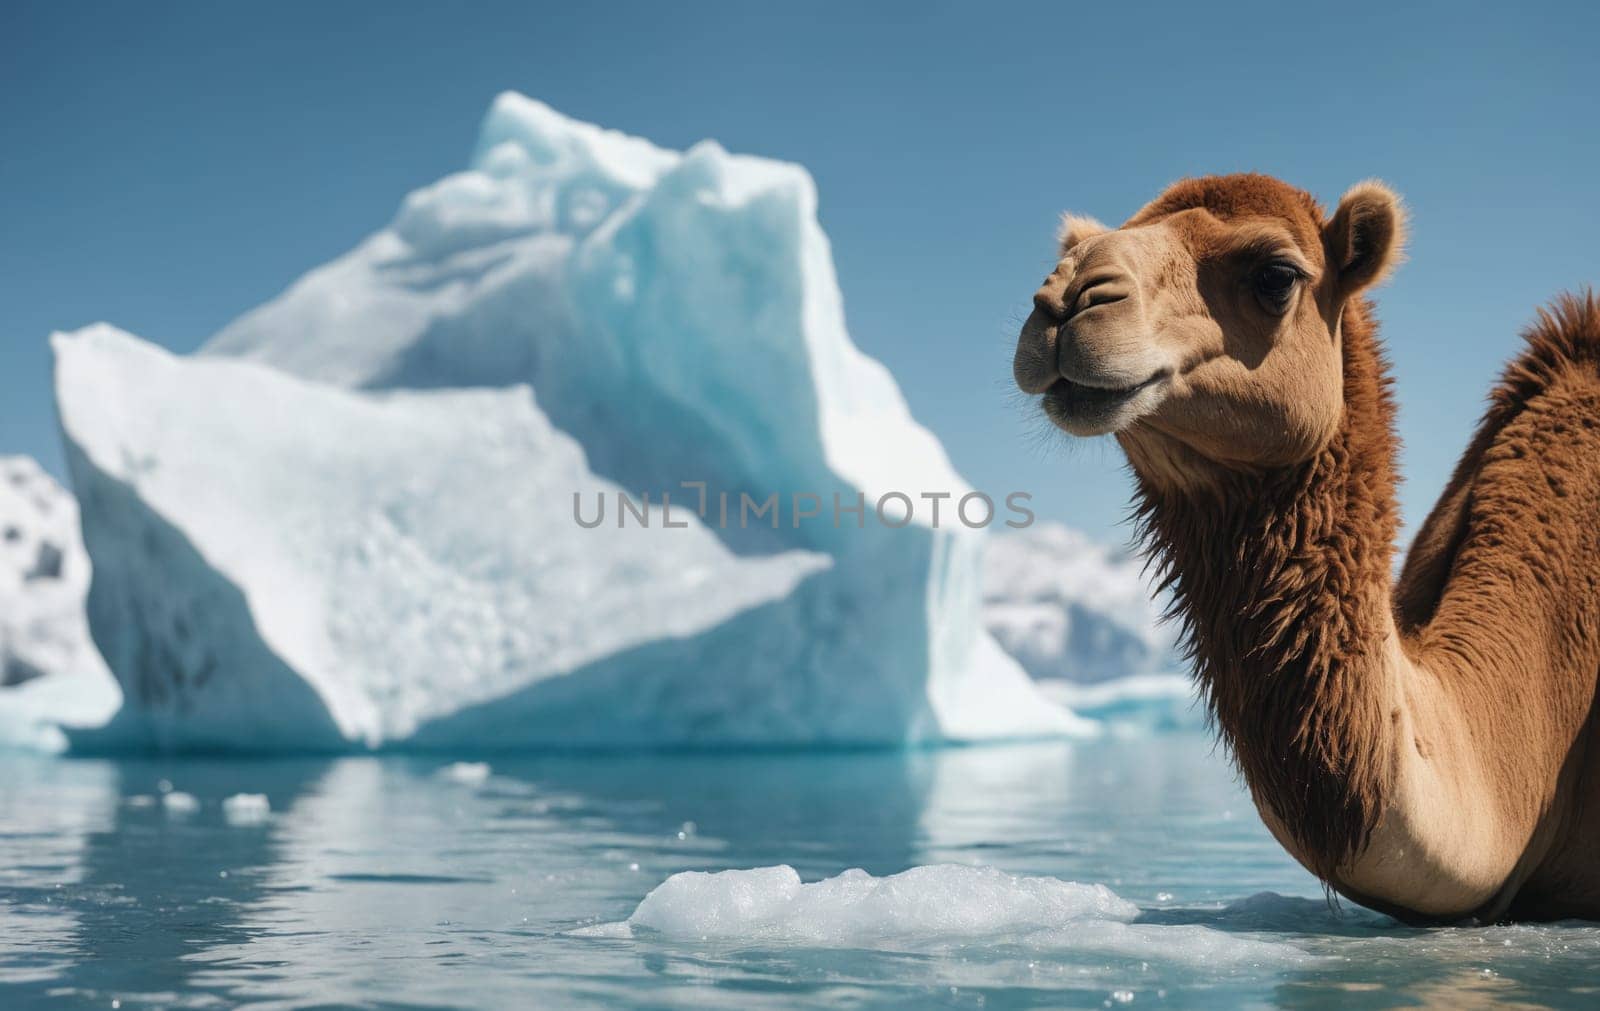 A fawncolored camel stands in the water with icebergs in the background against a natural landscape of grassland and sky